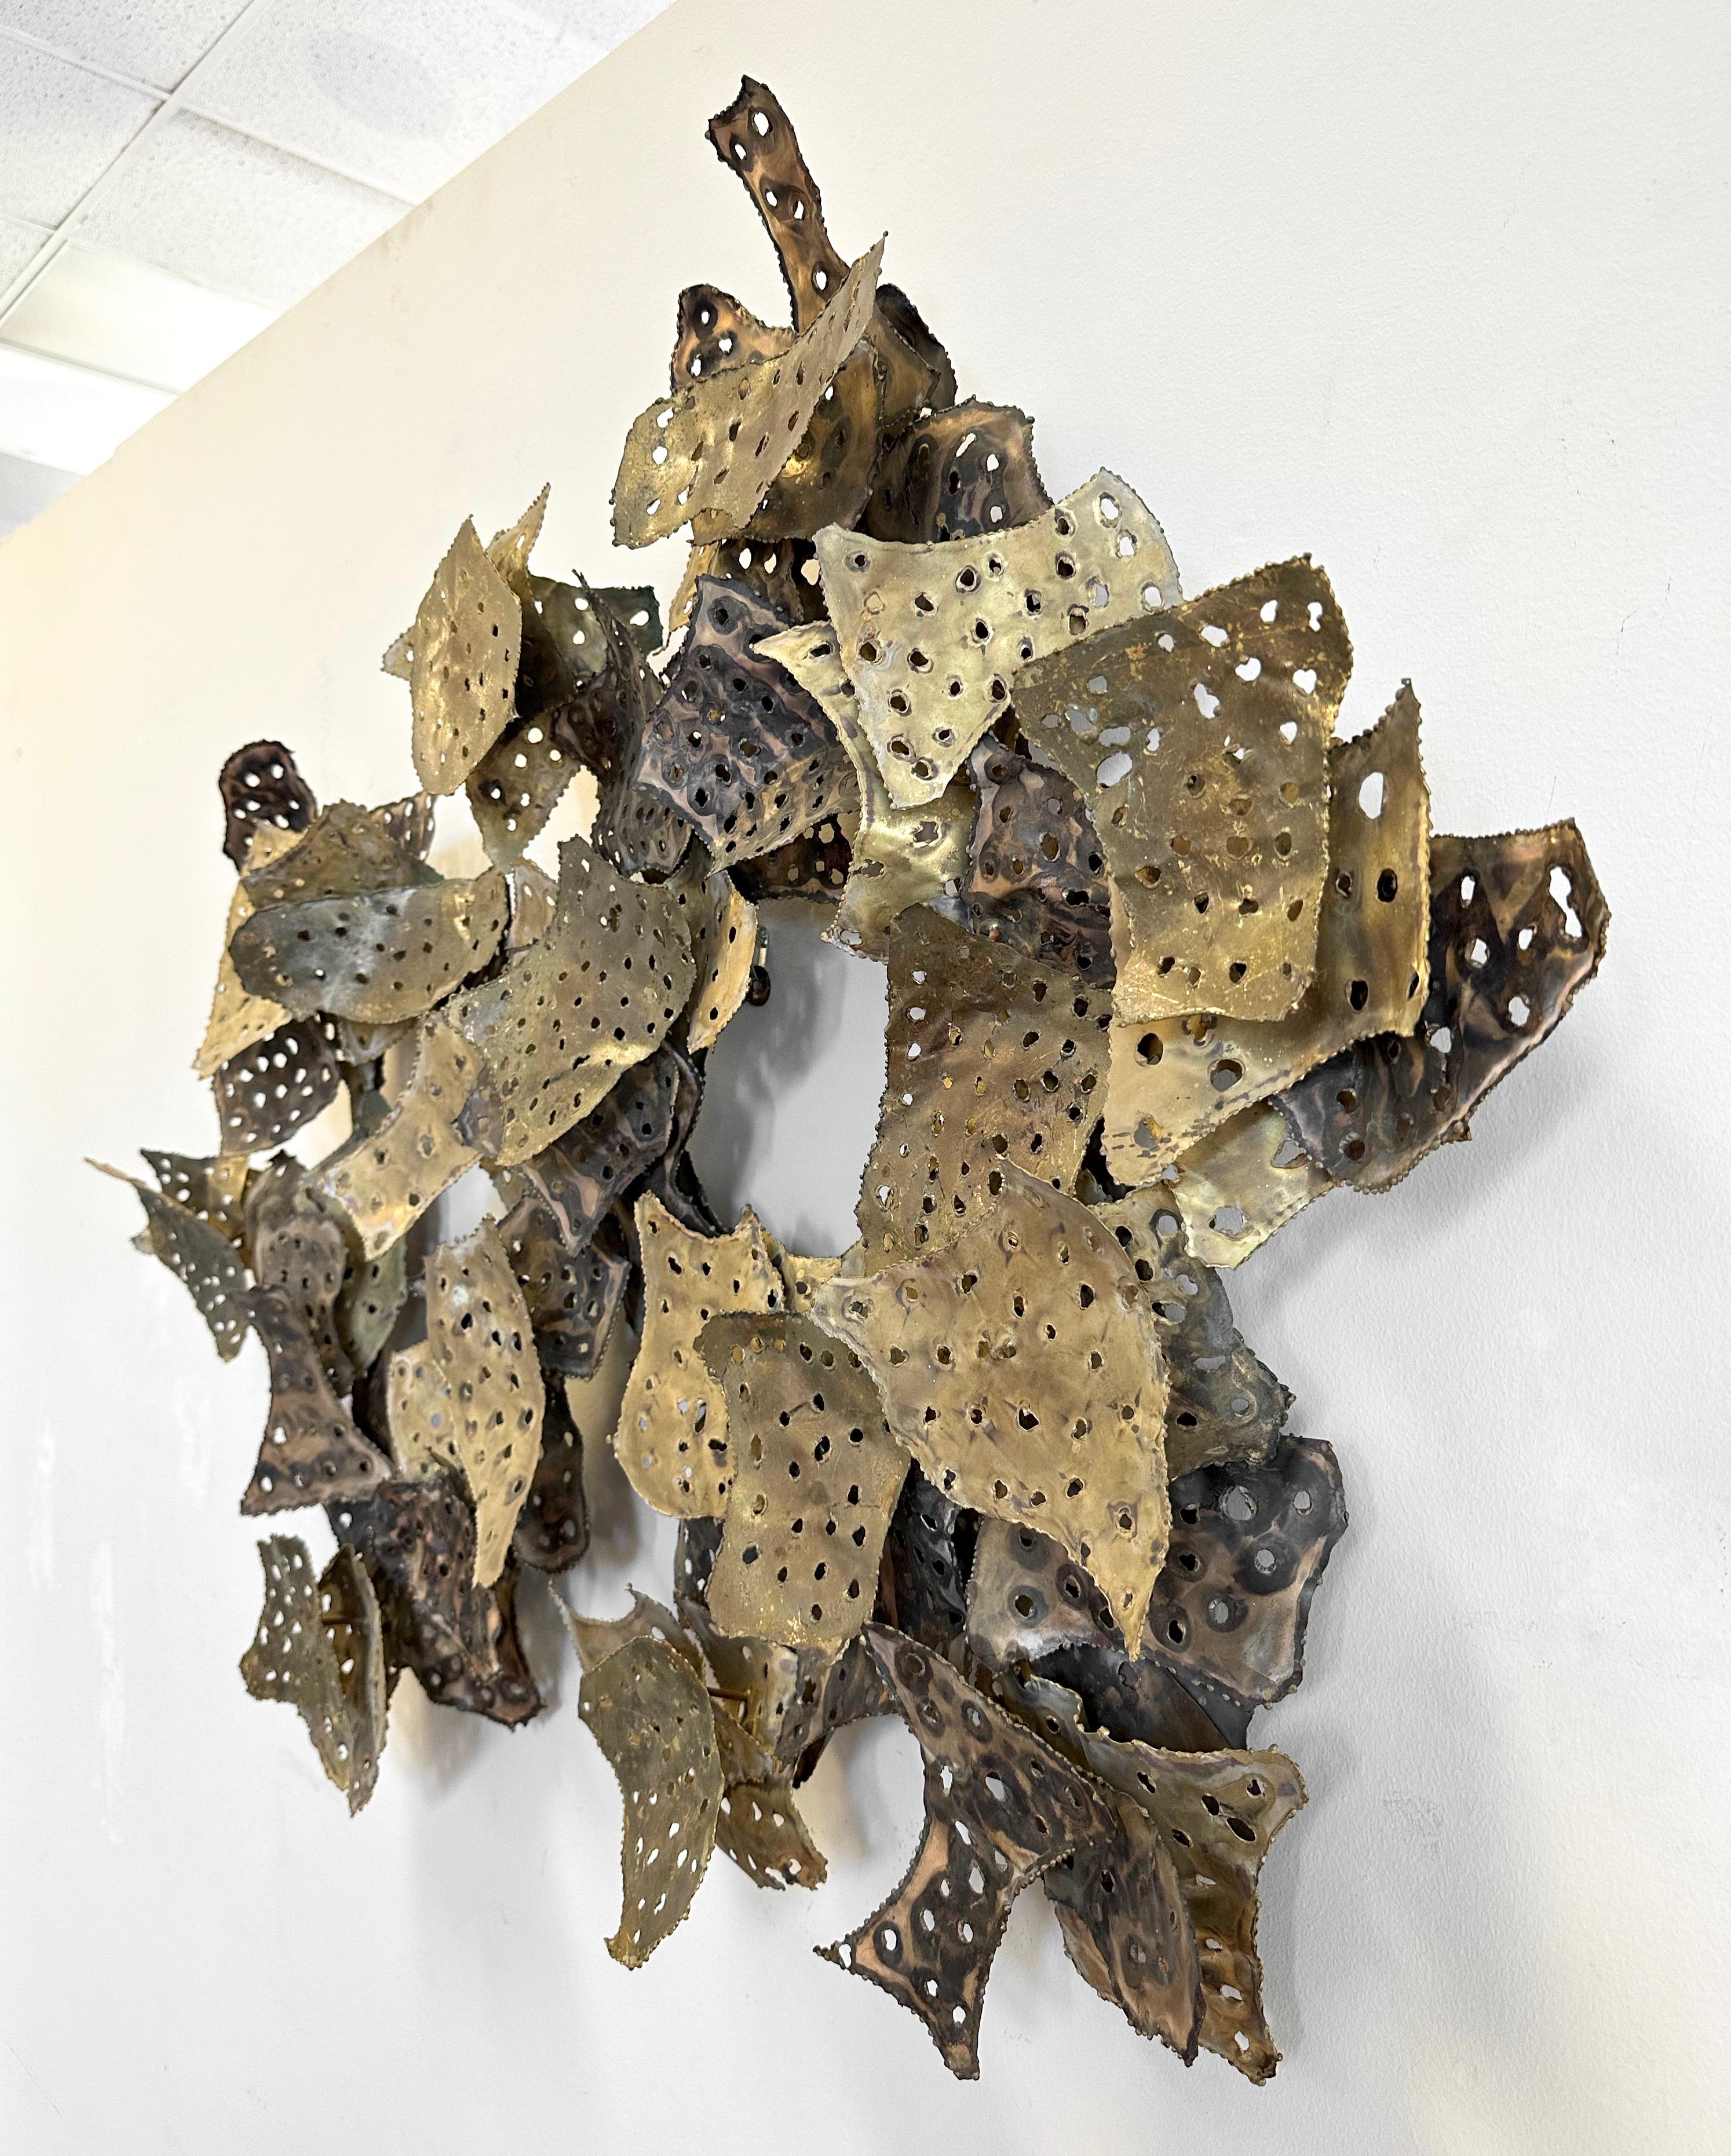 Patinated Bruce and William Friedle Large Brutalist Metal Wall Sculpture, Signed, 1970s For Sale